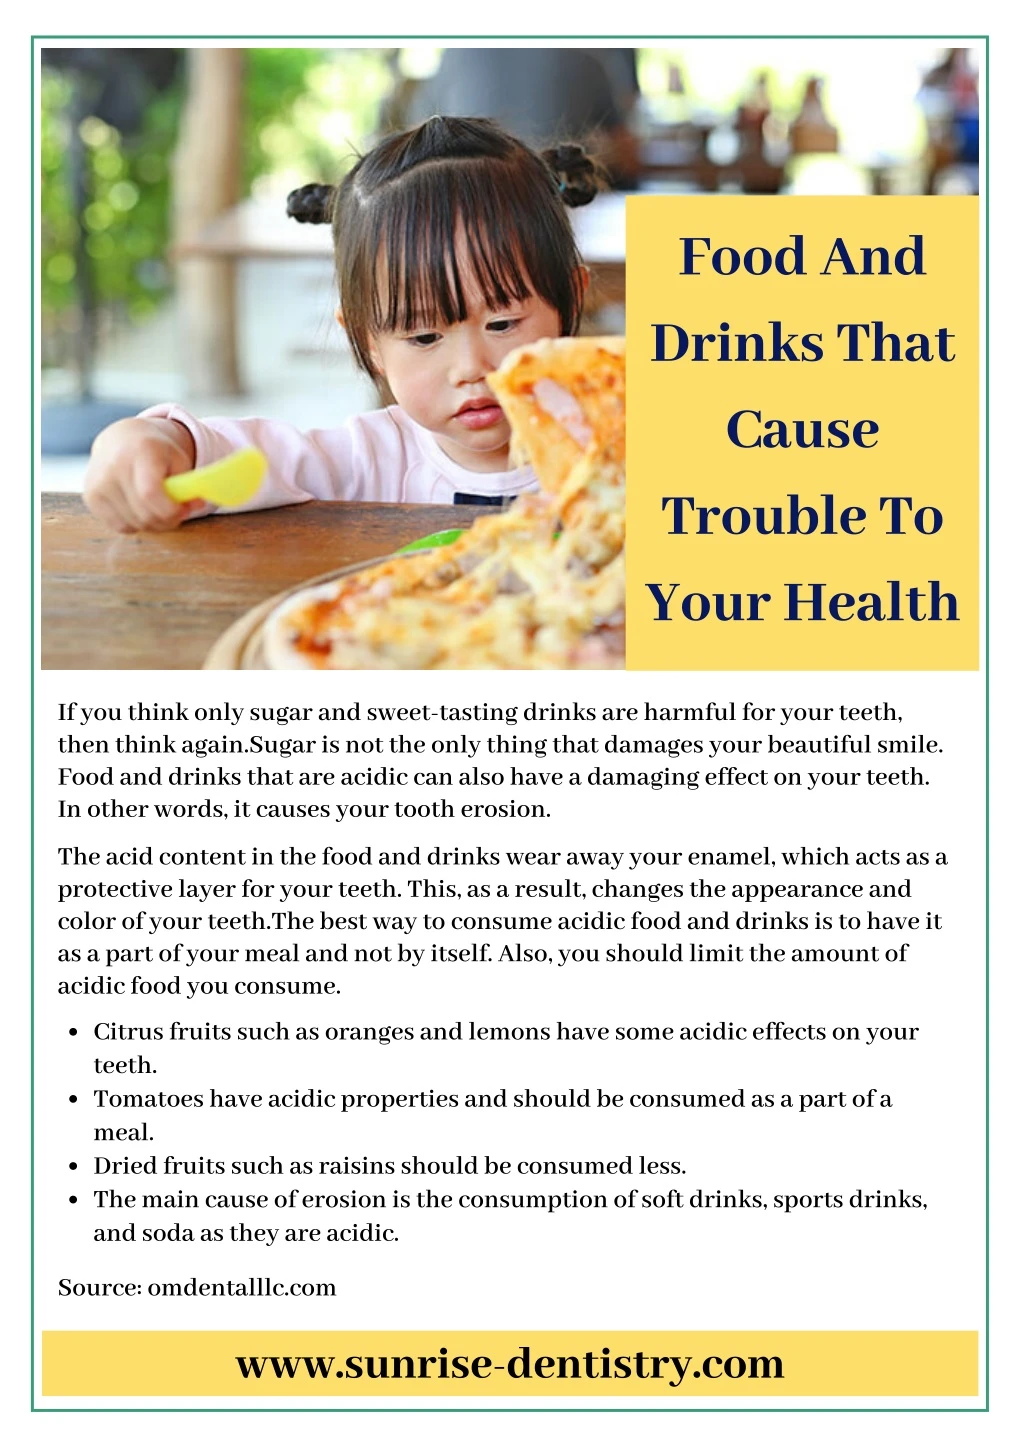 food and drinks that cause trouble to your health